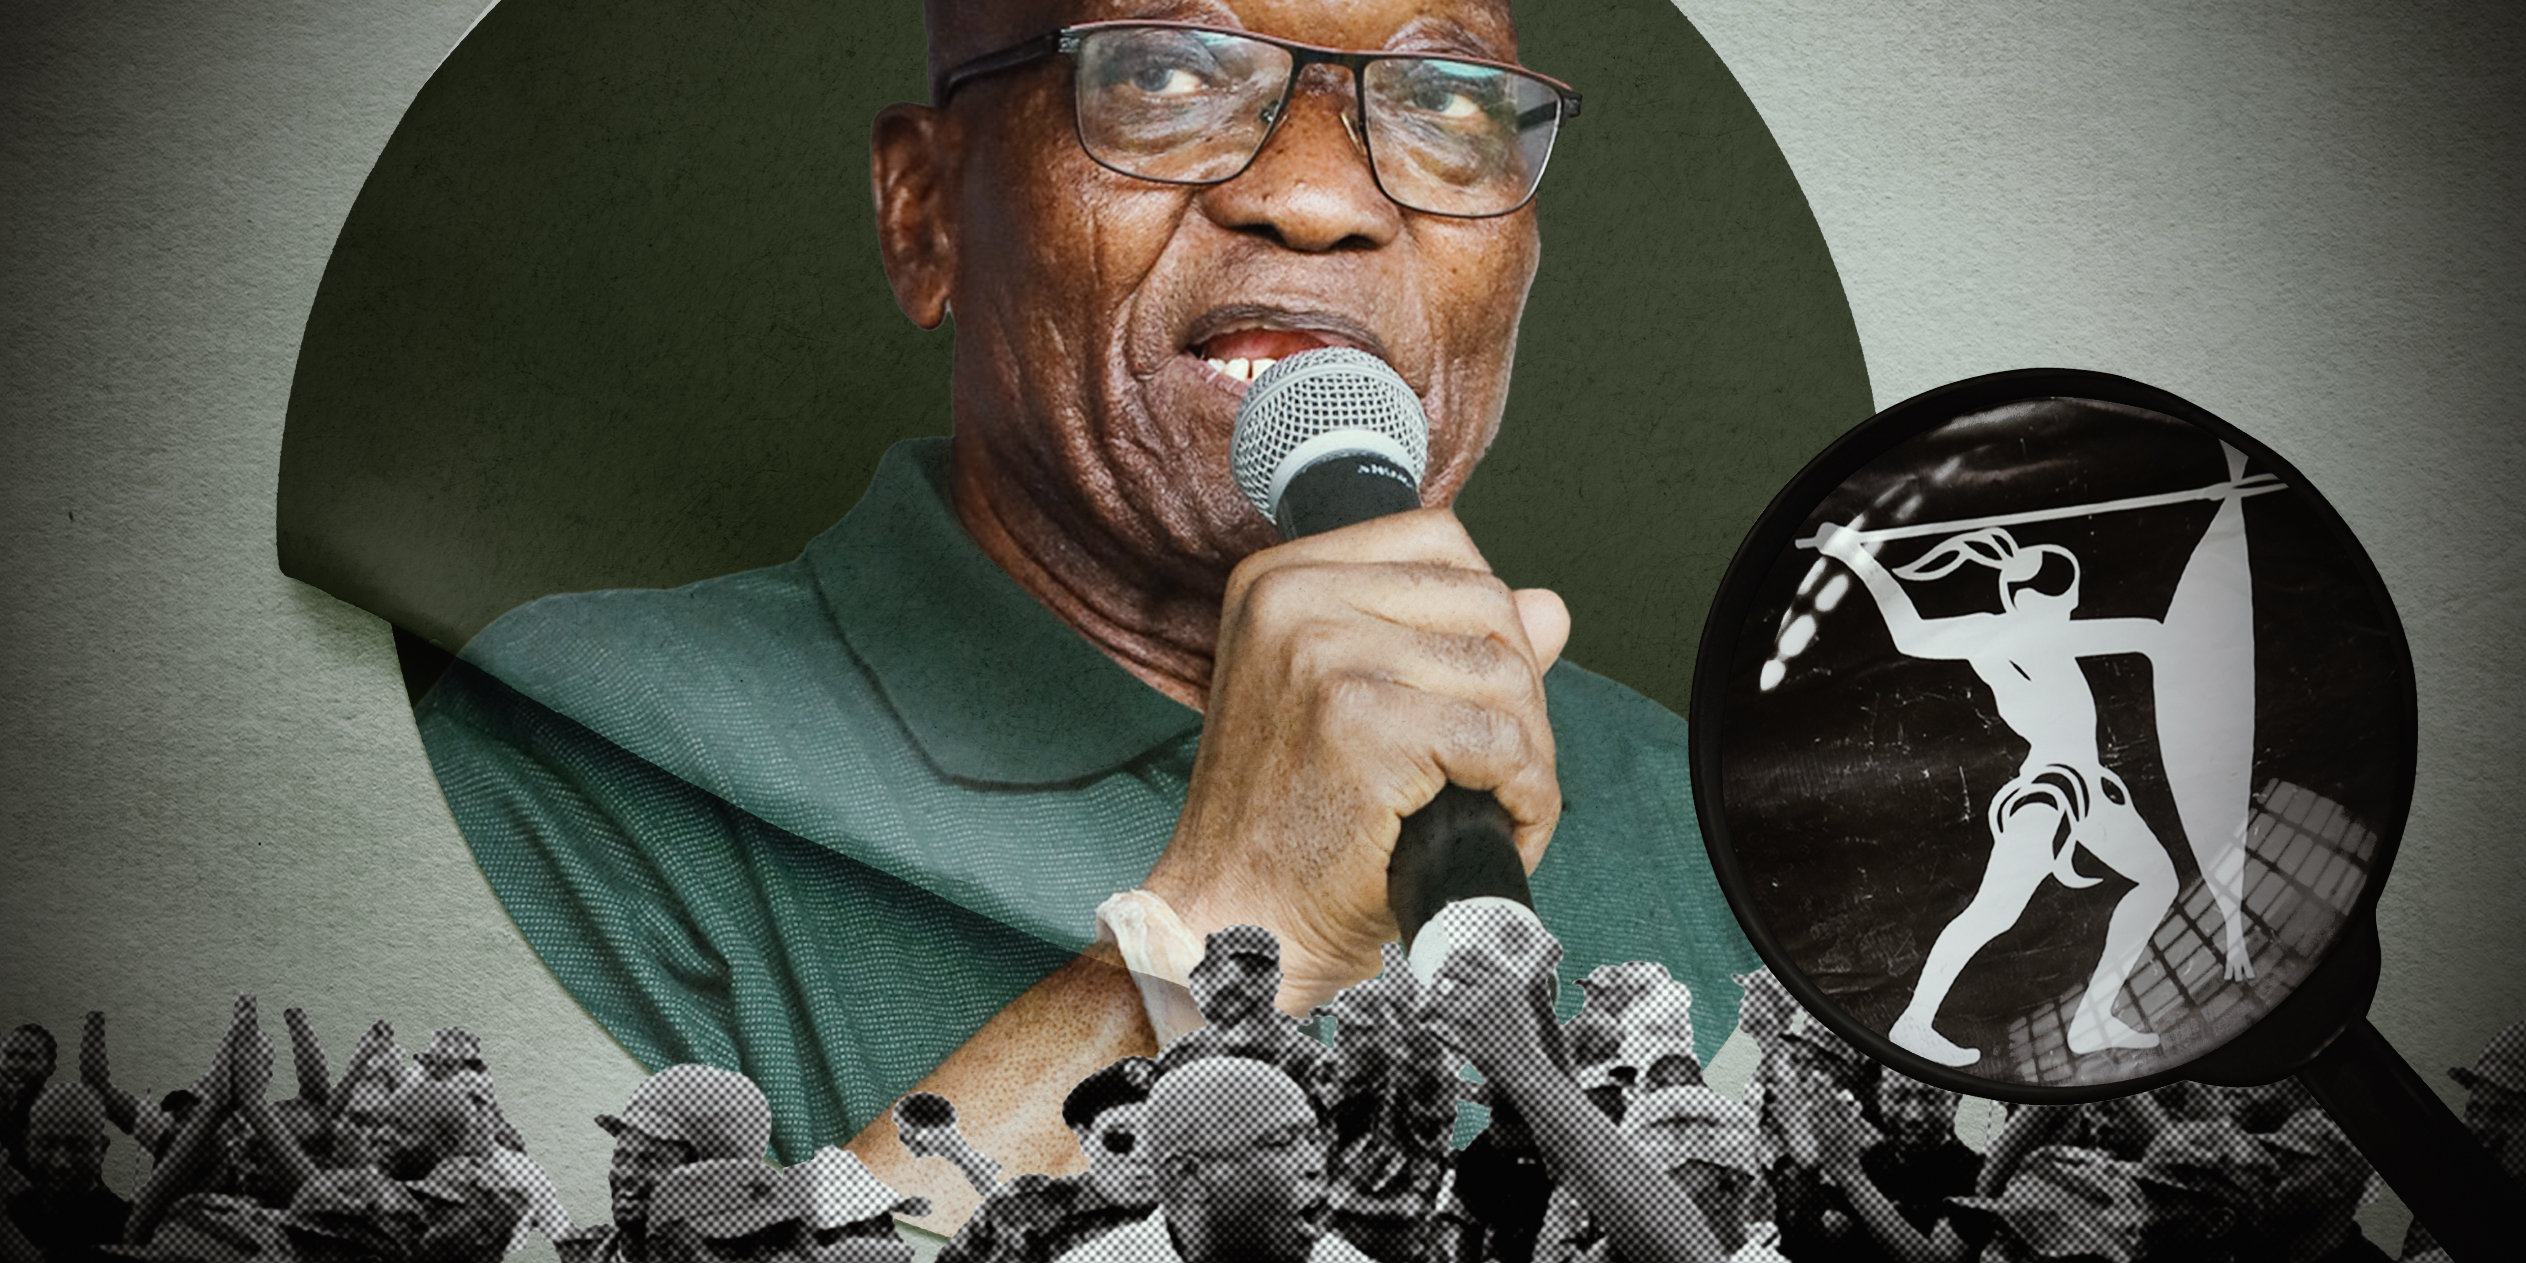 lest we forget — jacob zuma and his little helpers took south africa on the path of destruction